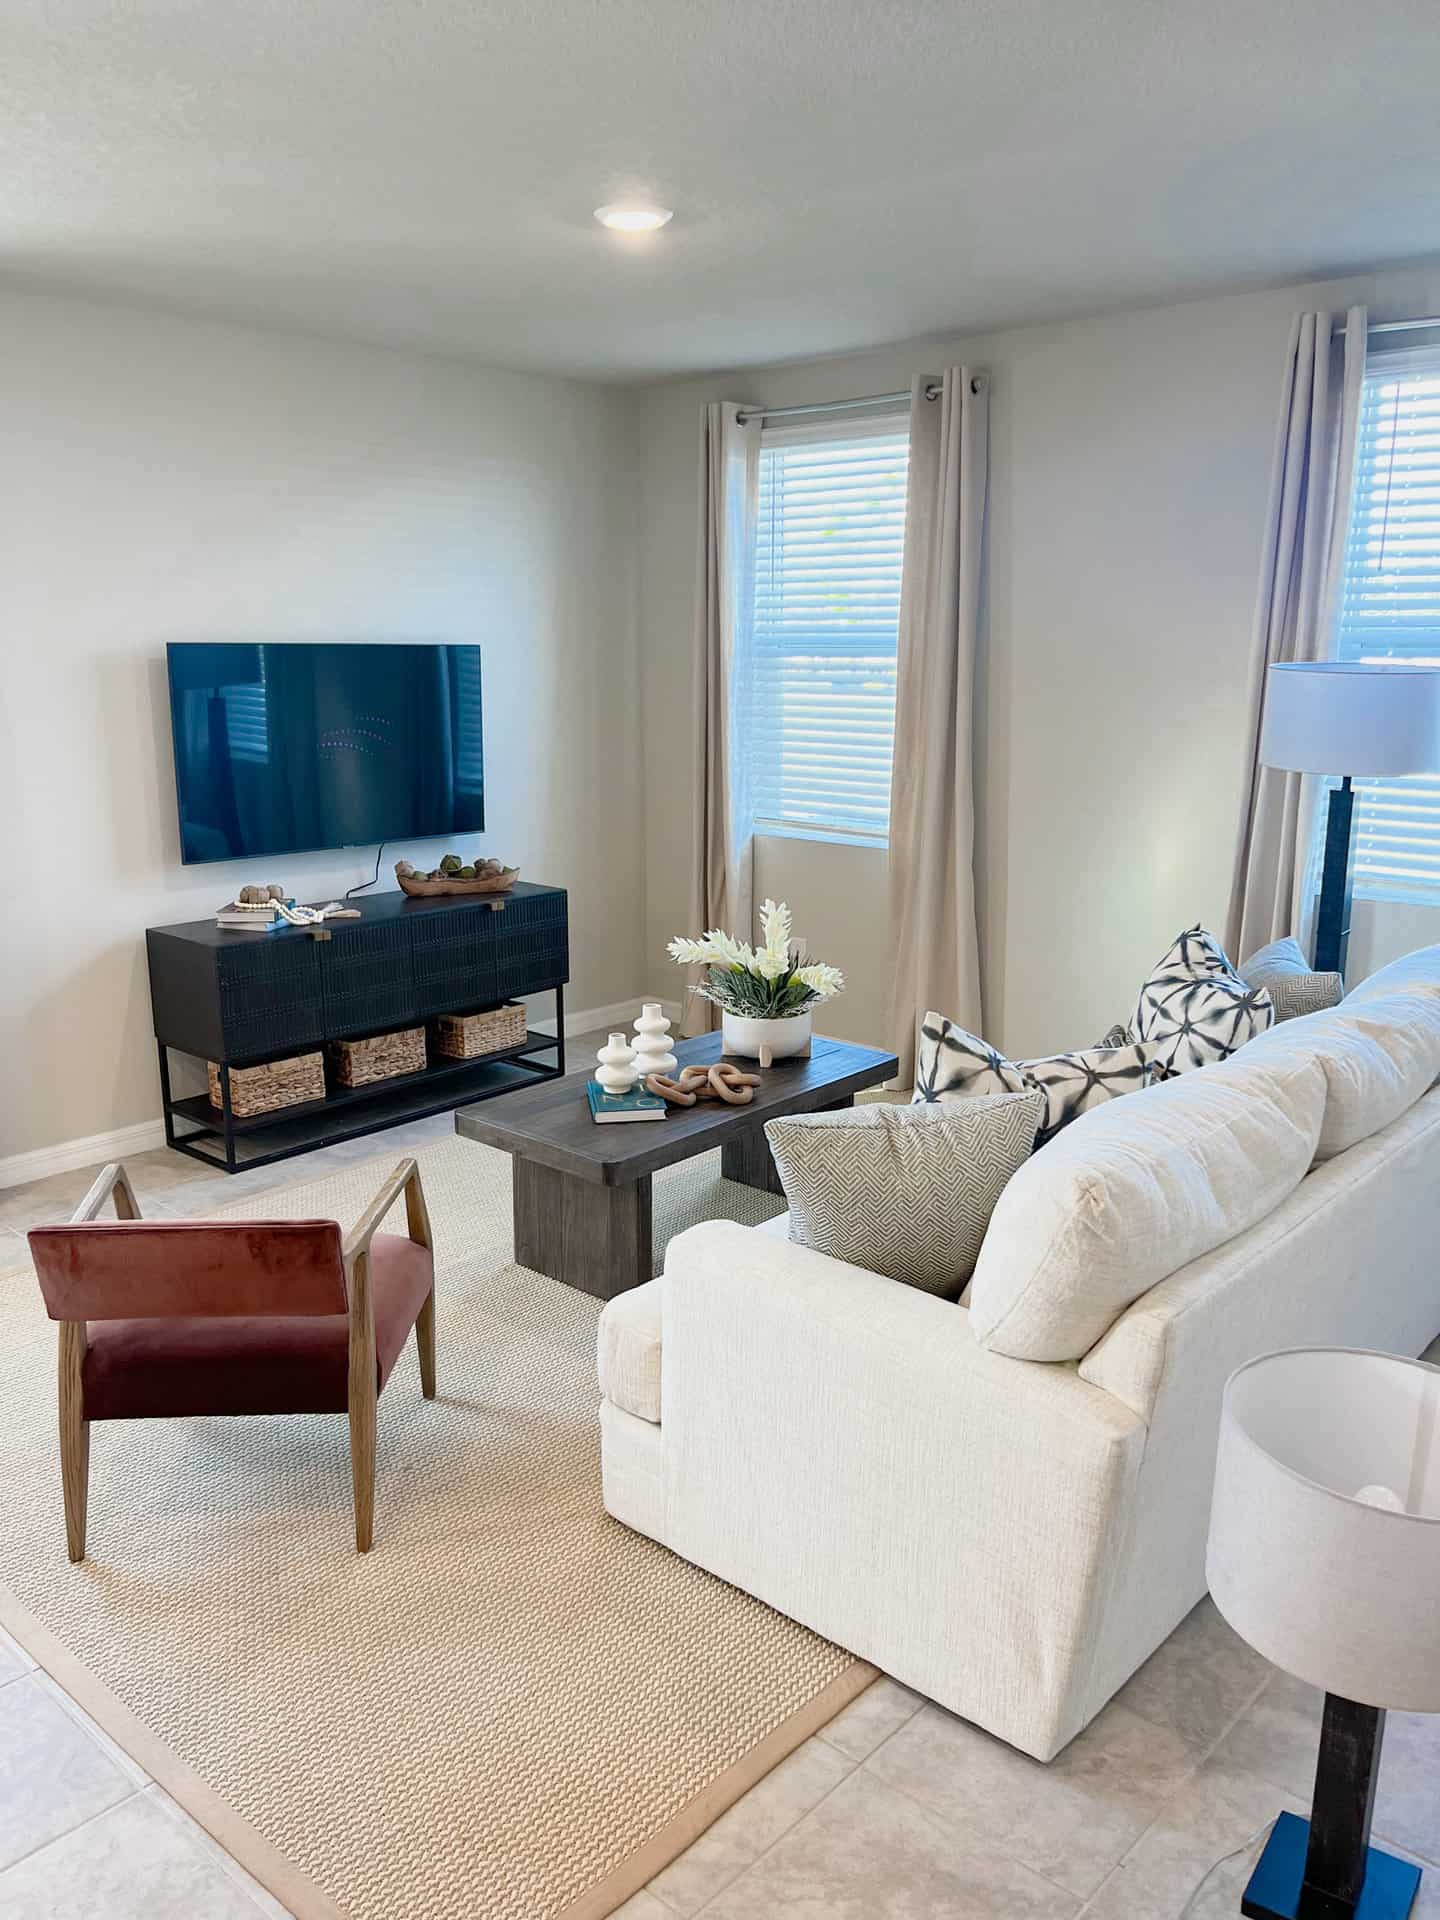 Townhome living room with sofa, armchair, coffee table, lamp, and wall-mounted TV